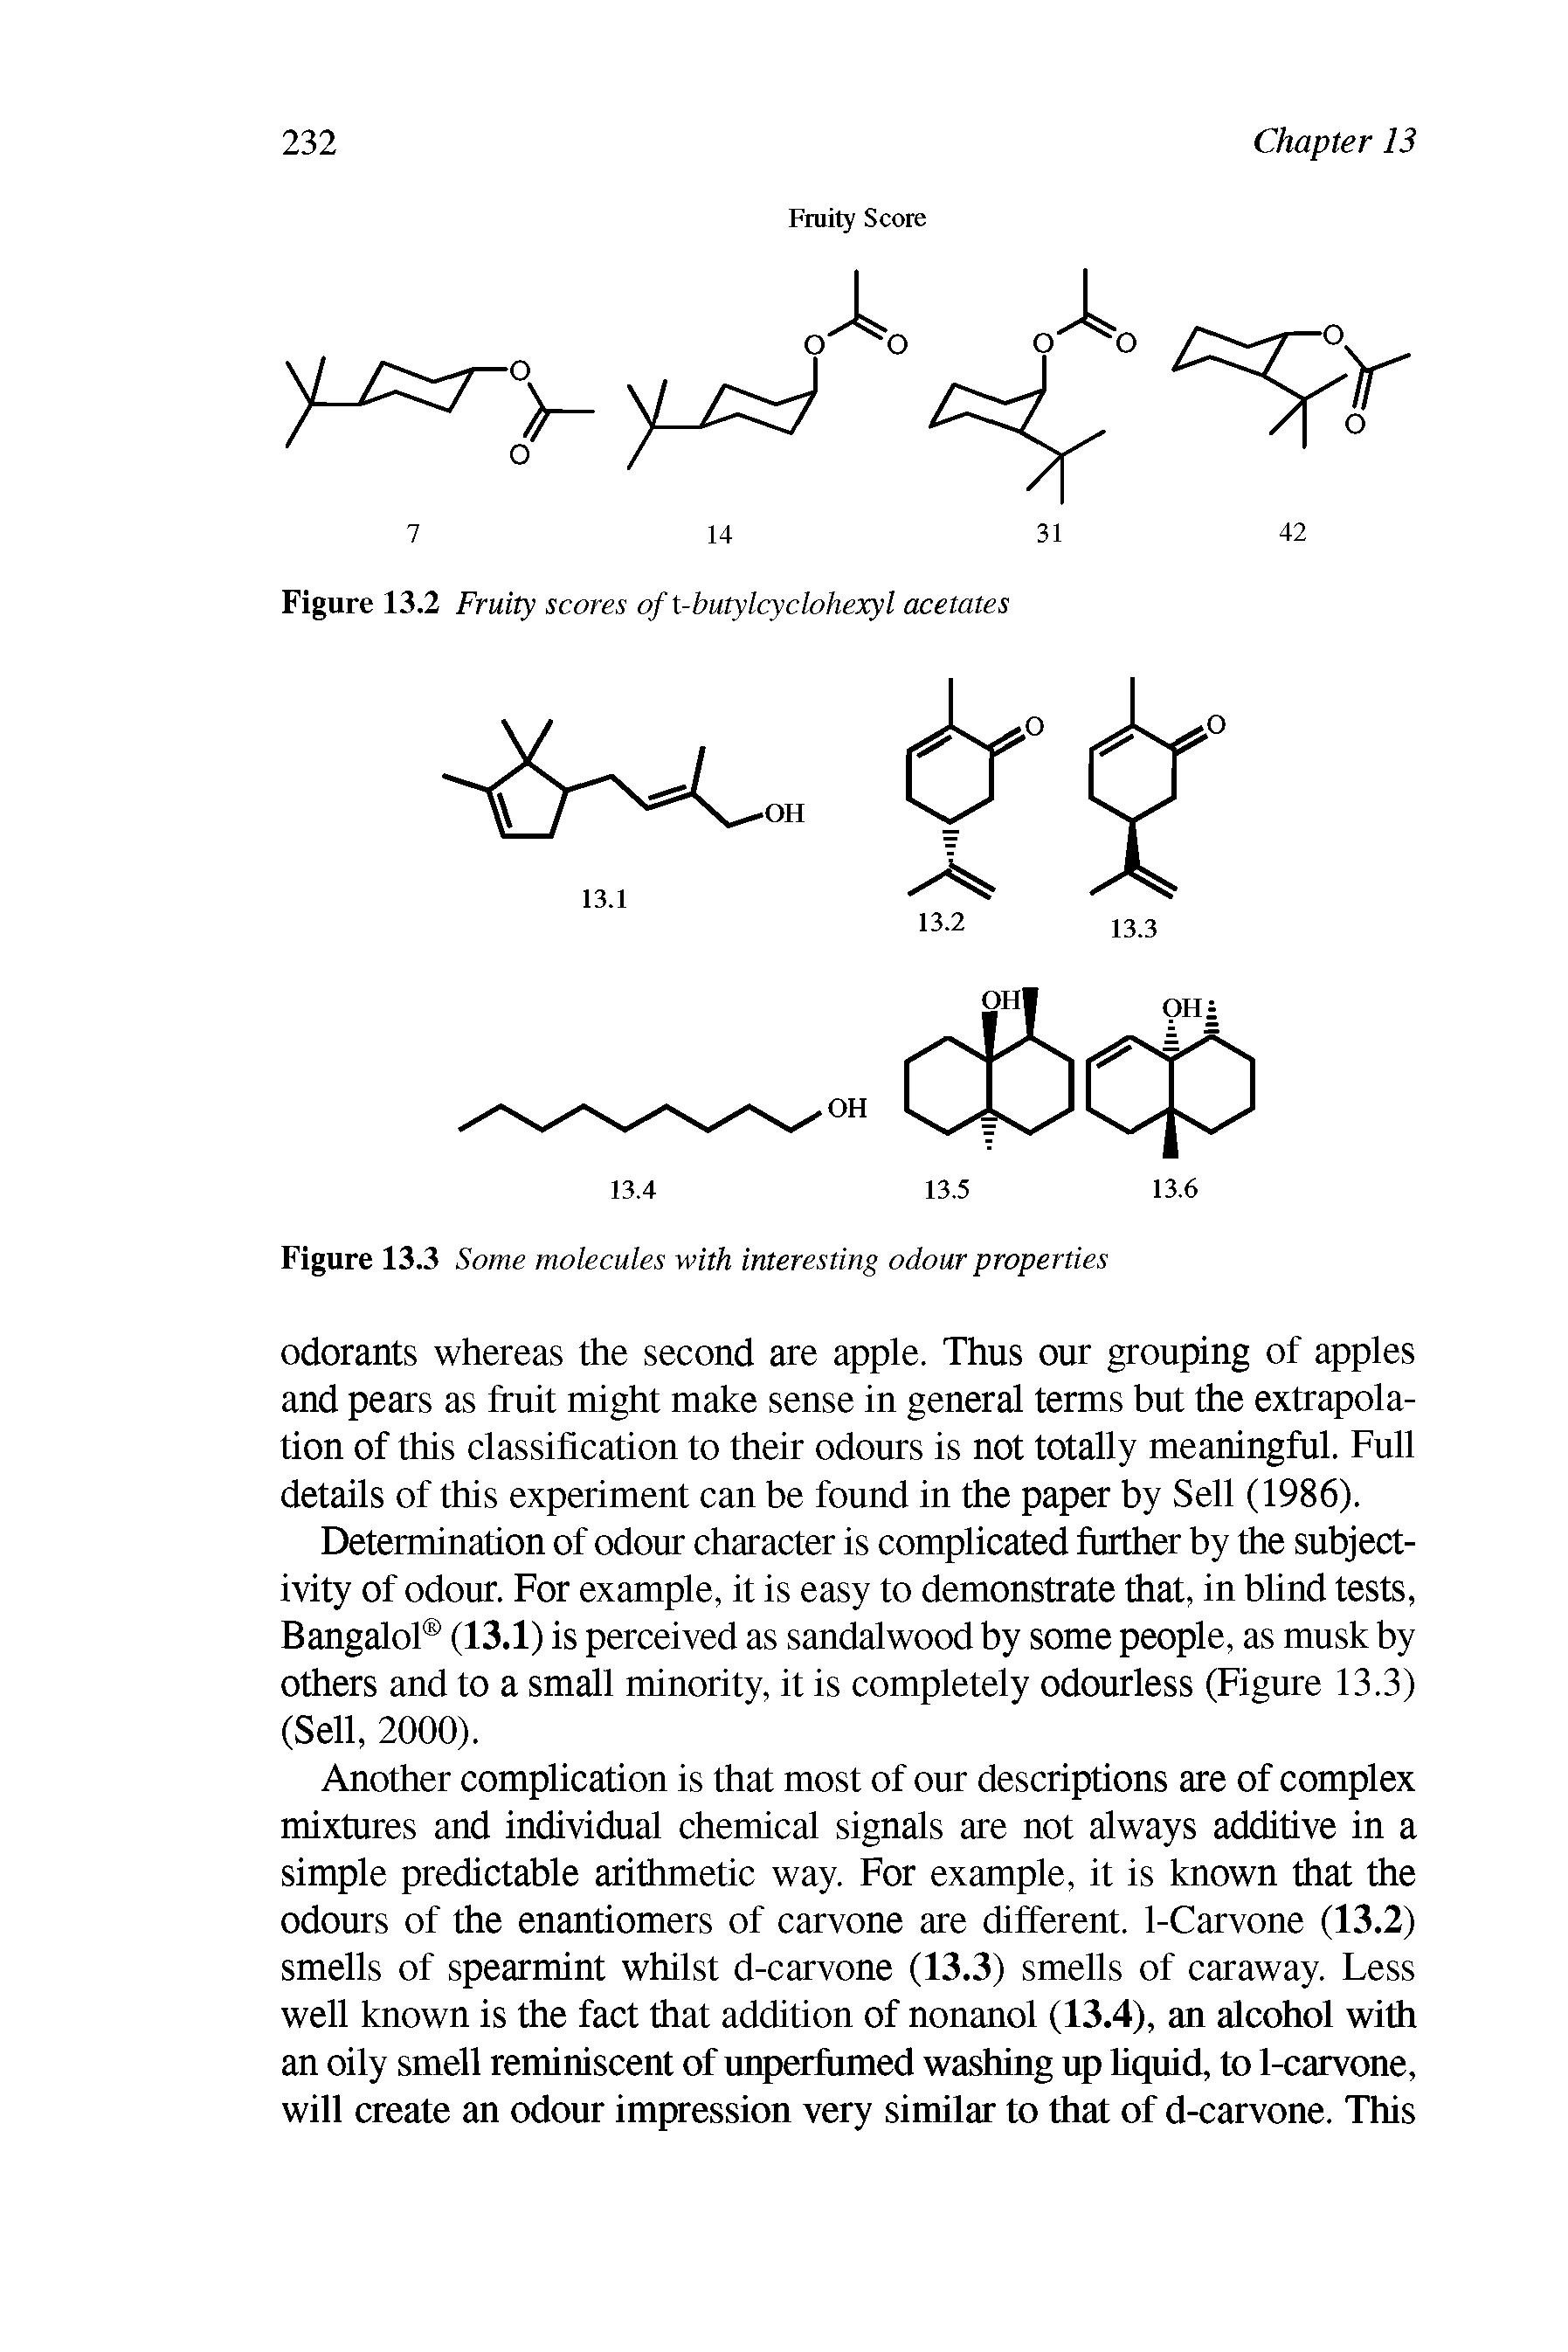 Figure 13.3 Some molecules with interesting odour properties...